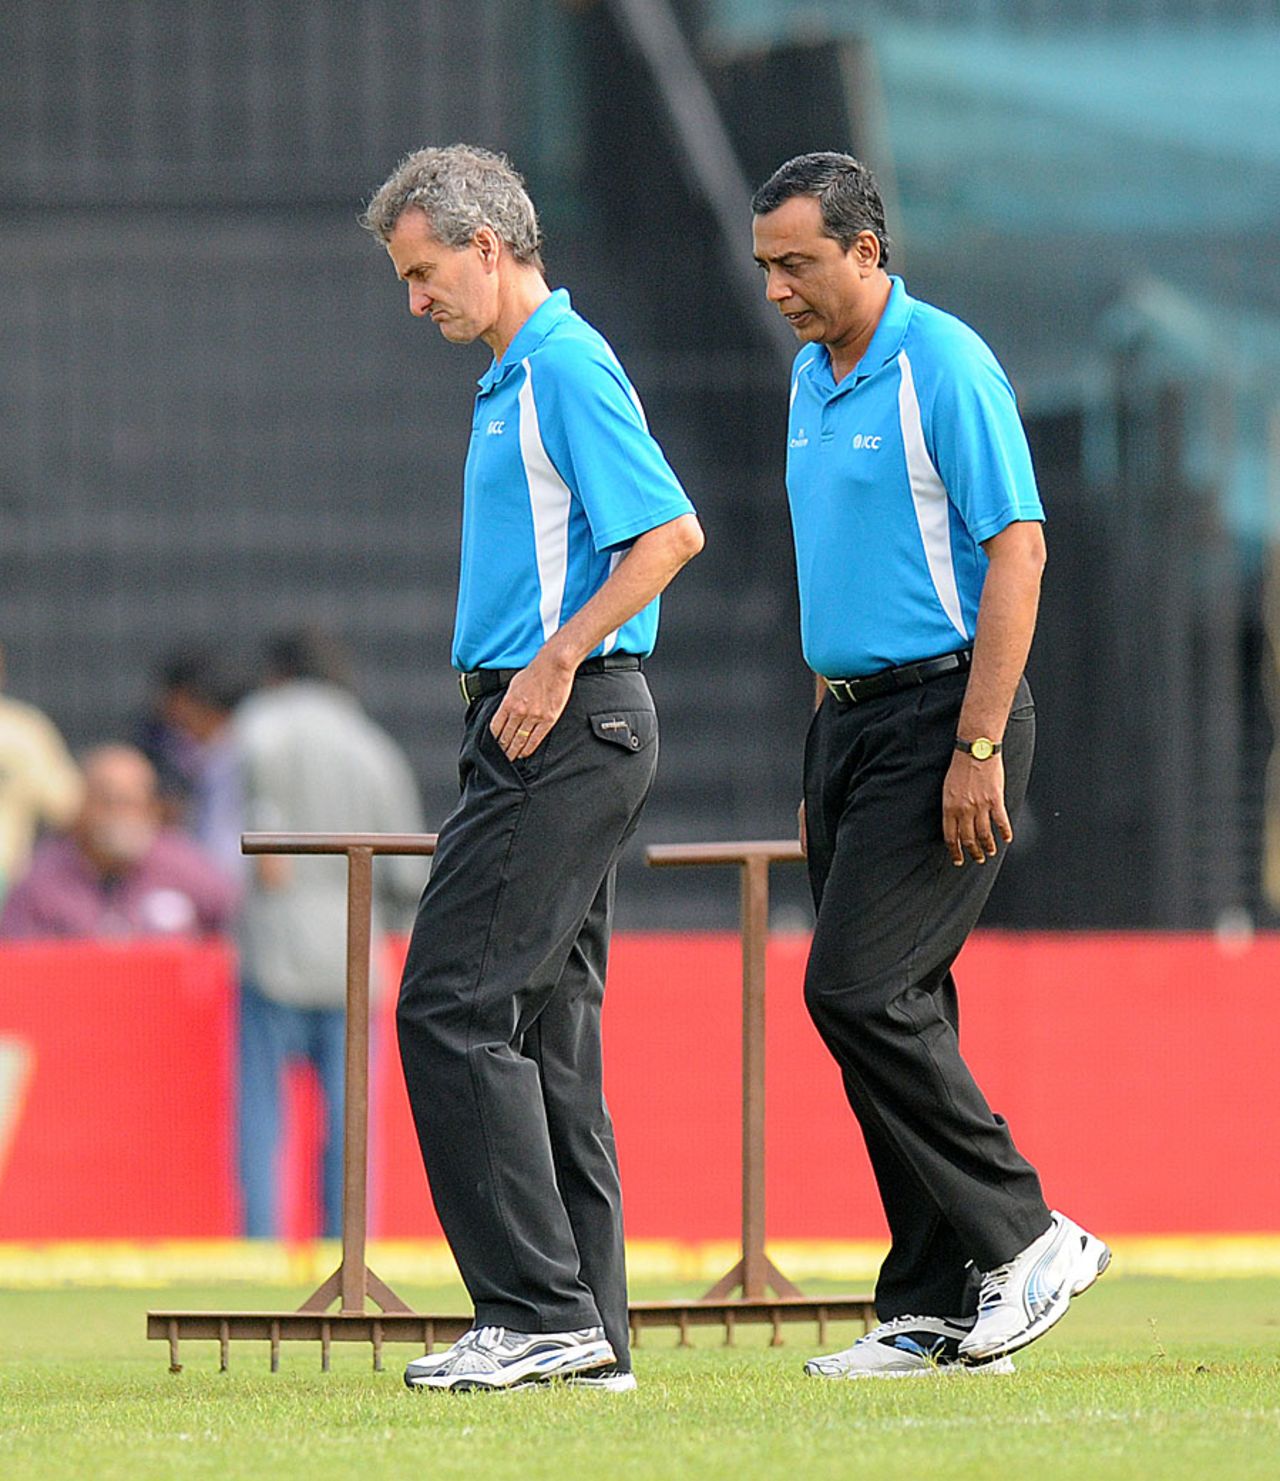 Umpires Billy Bowden and S Ravi inspect the conditions, India v Pakistan, 1st ODI, Chennai, December 30, 2012